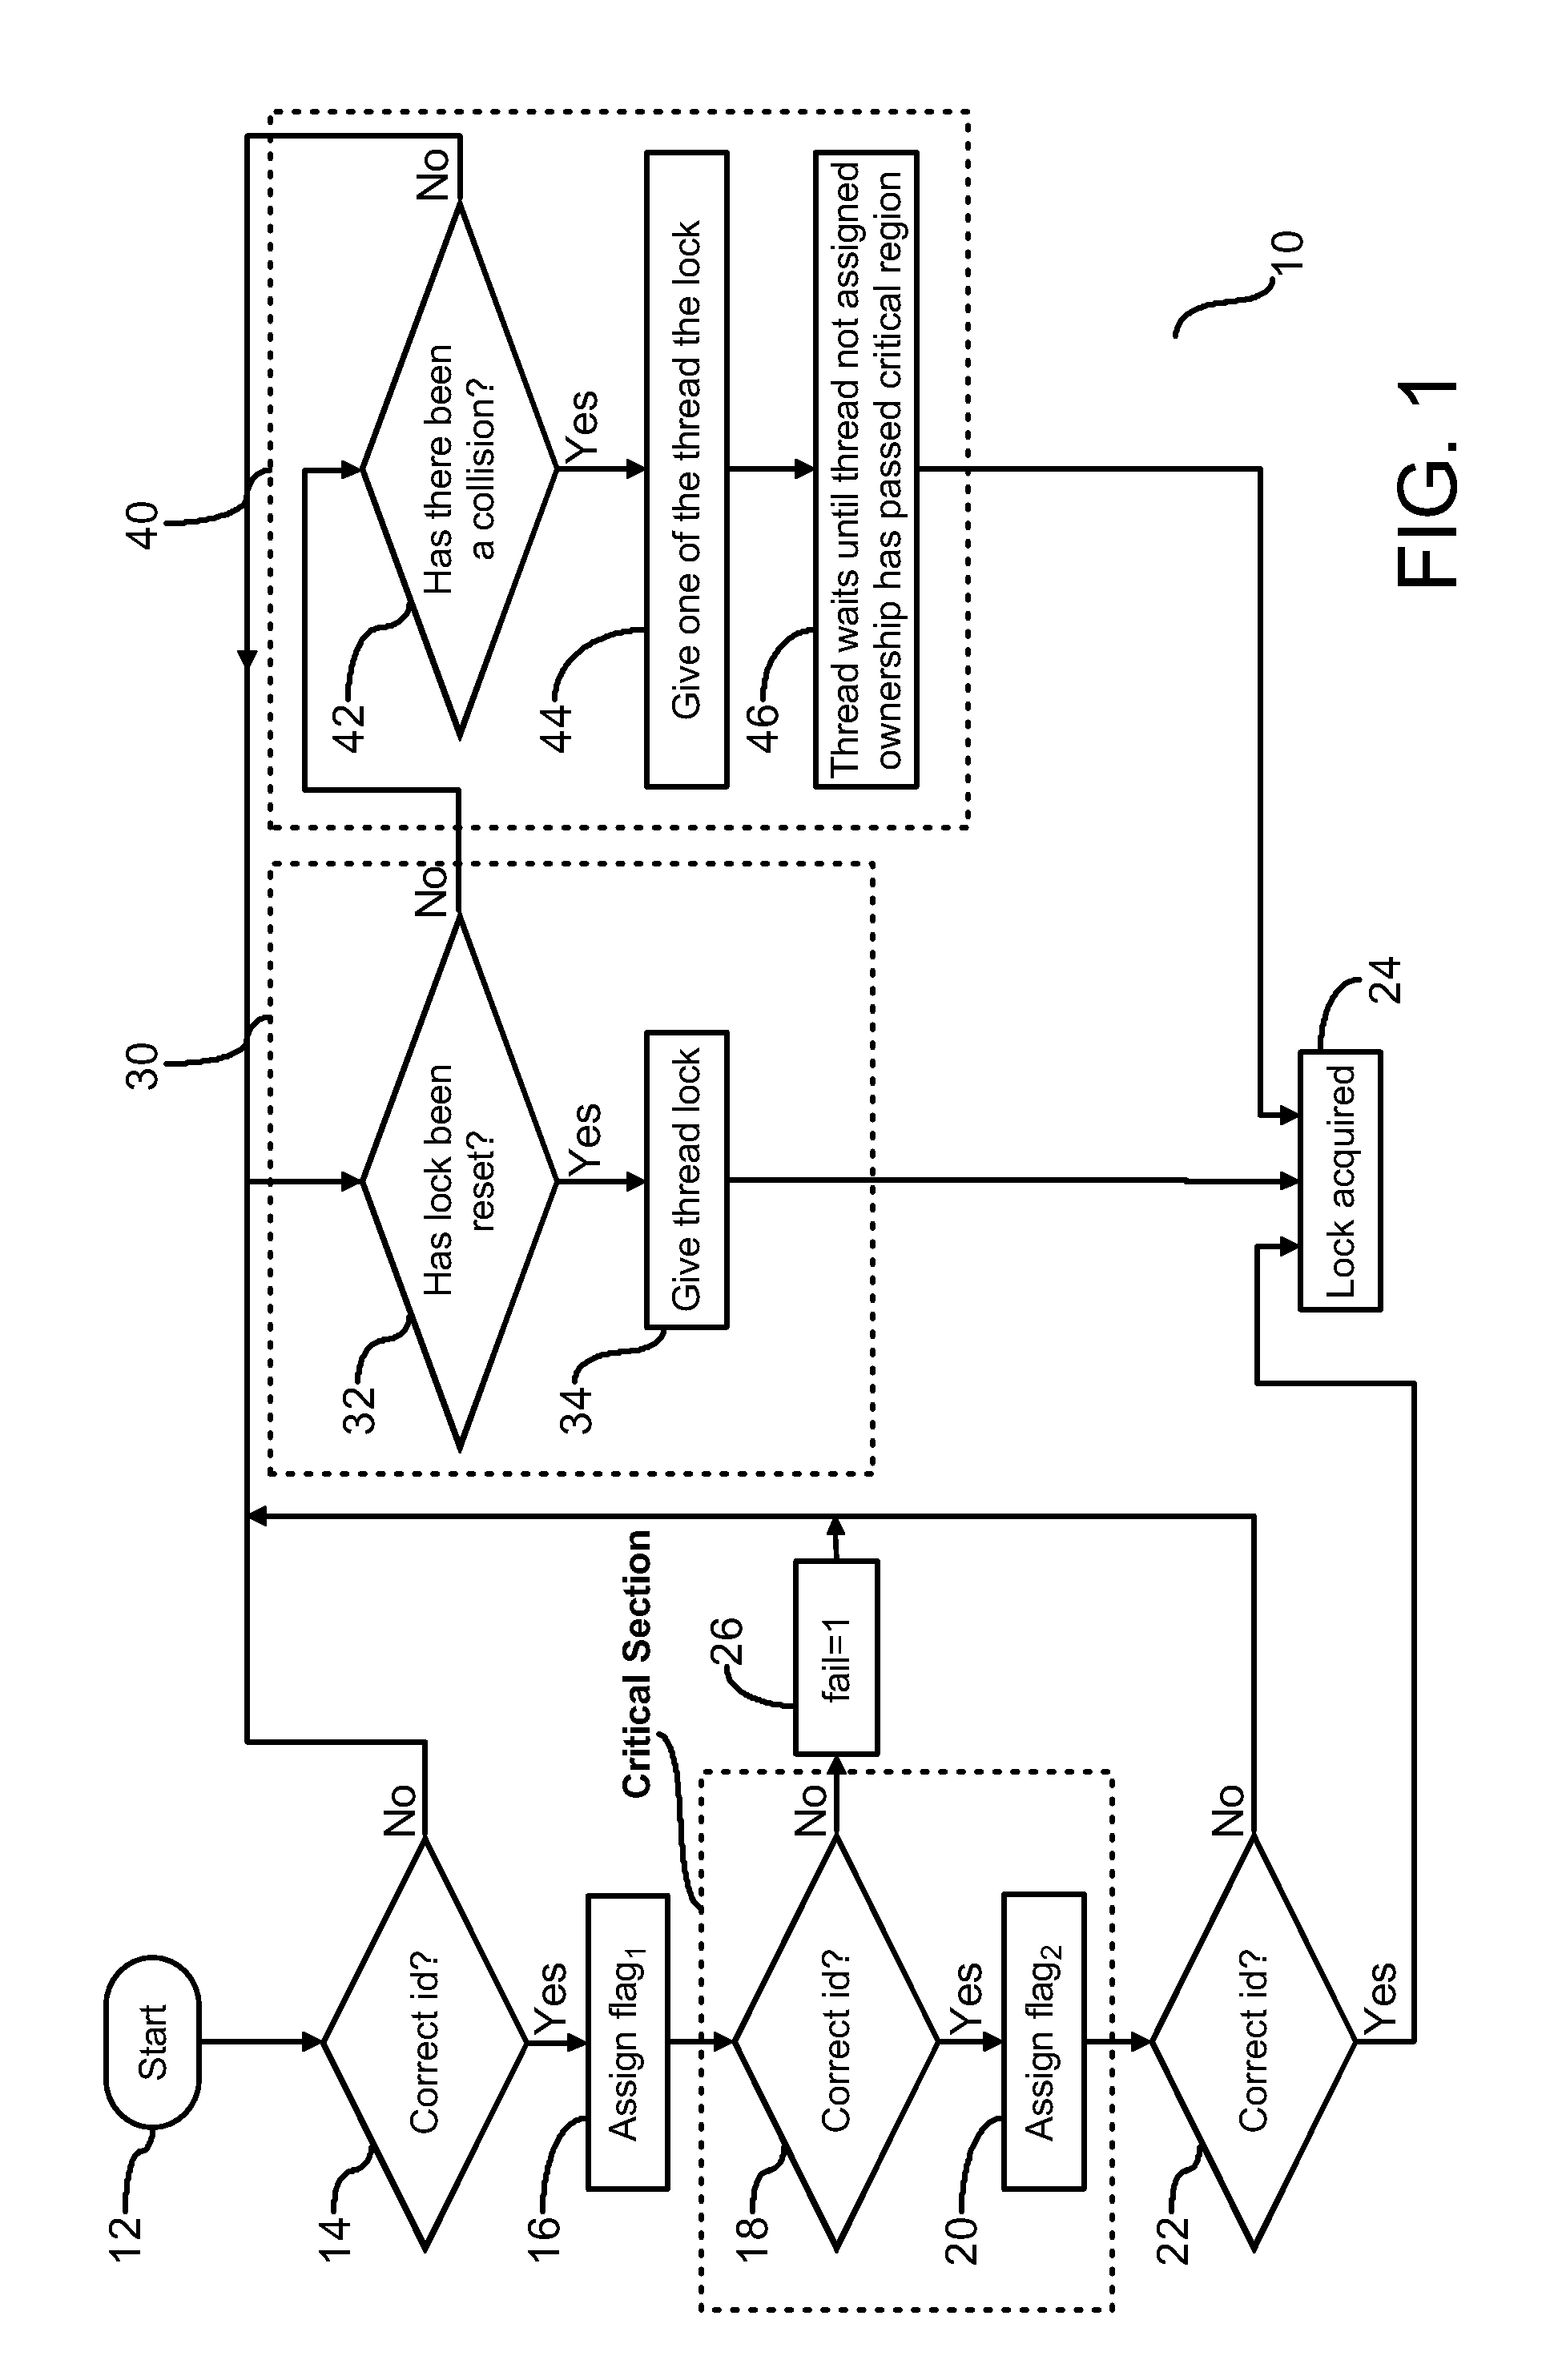 Method and System for Speeding Up Mutual Exclusion